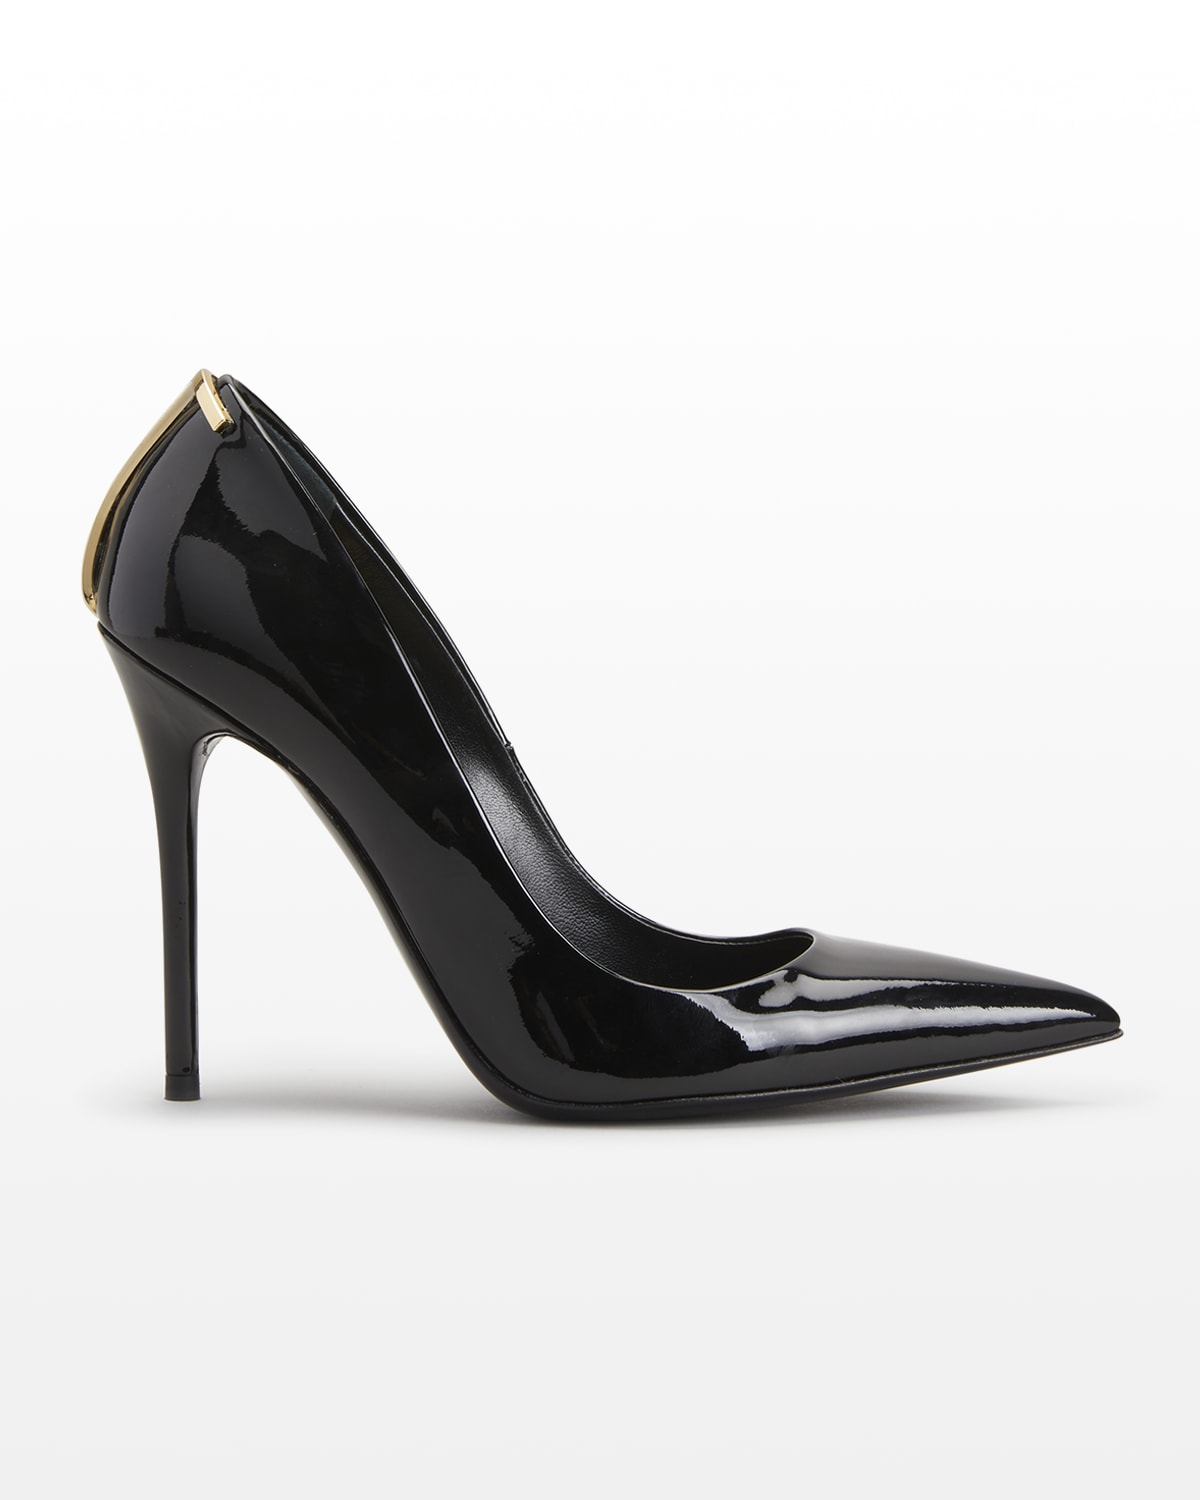 TOM FORD Iconic T Medallion Patent Pumps | Neiman Marcus